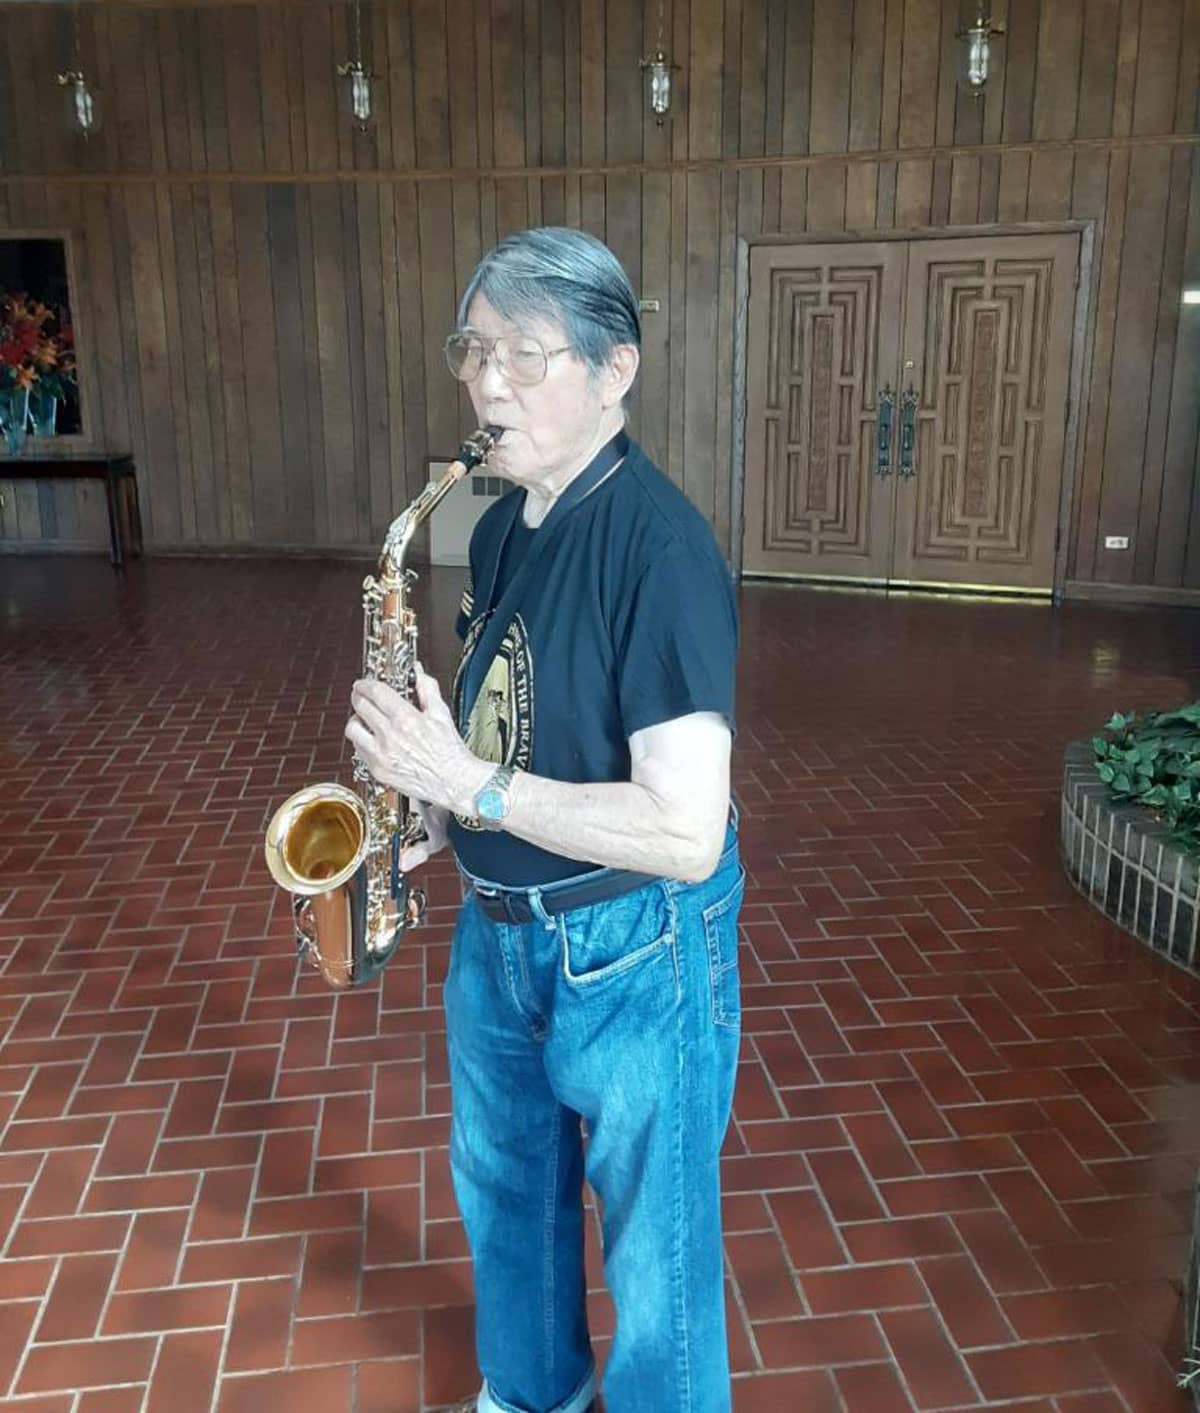 Older Adult standing in a room playing saxophone